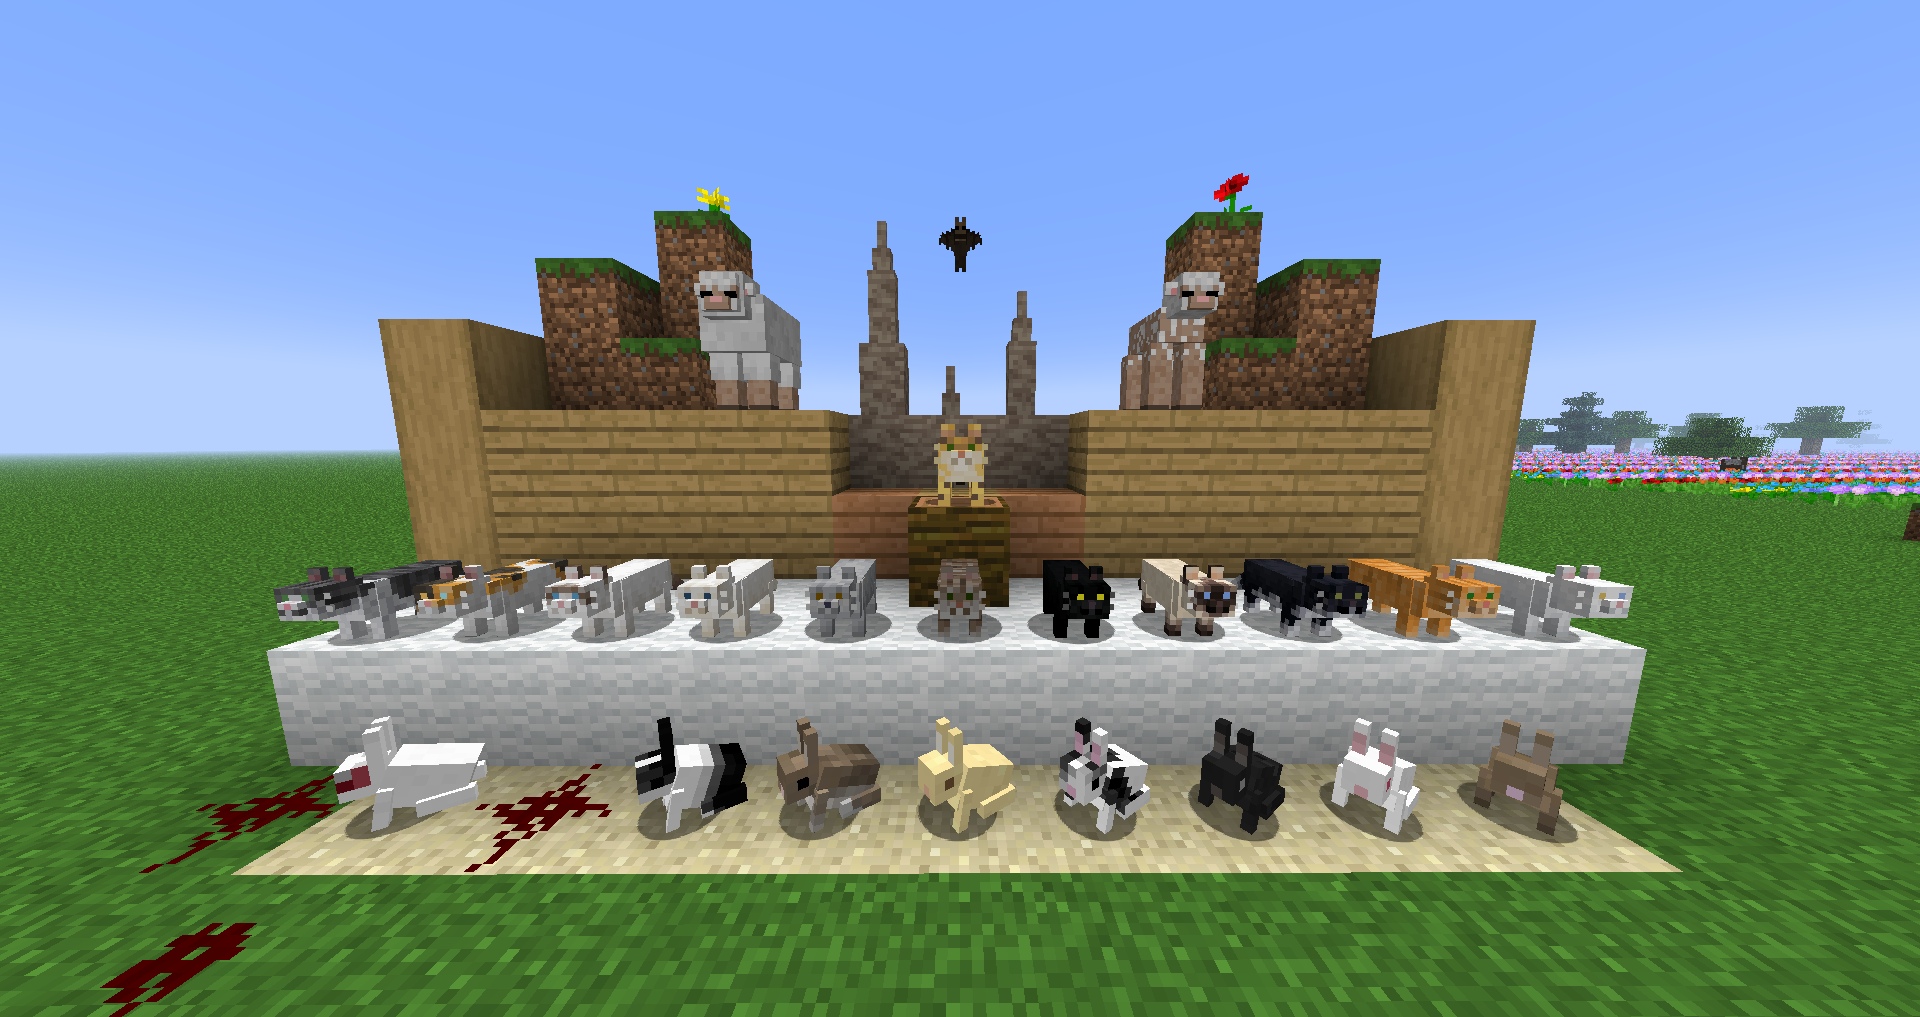 all the mobs!